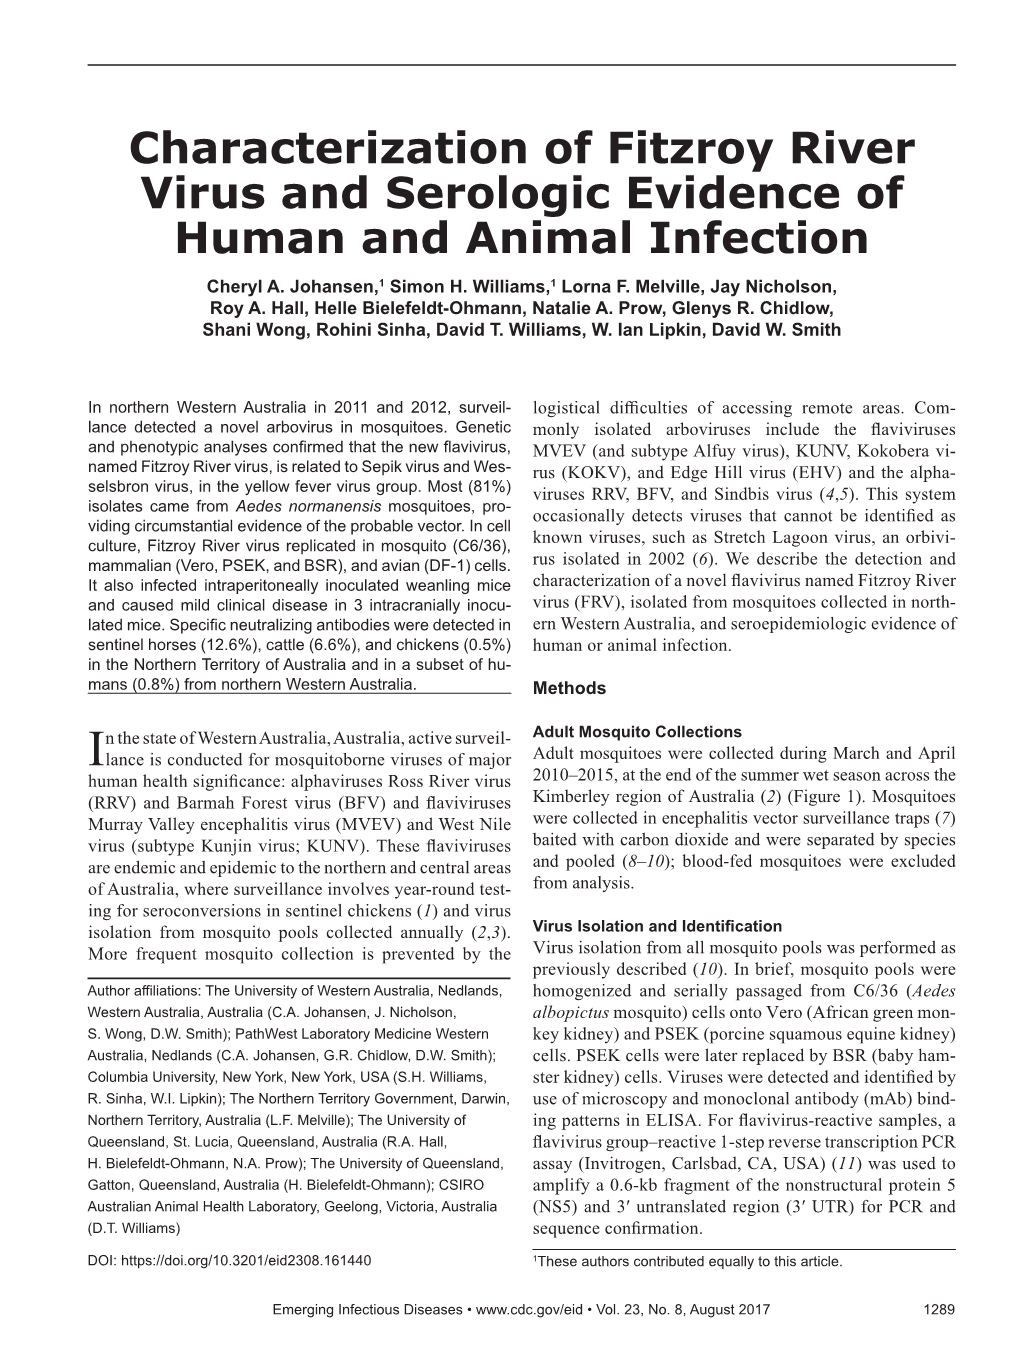 Characterization of Fitzroy River Virus, a Novel Flavivirus in The